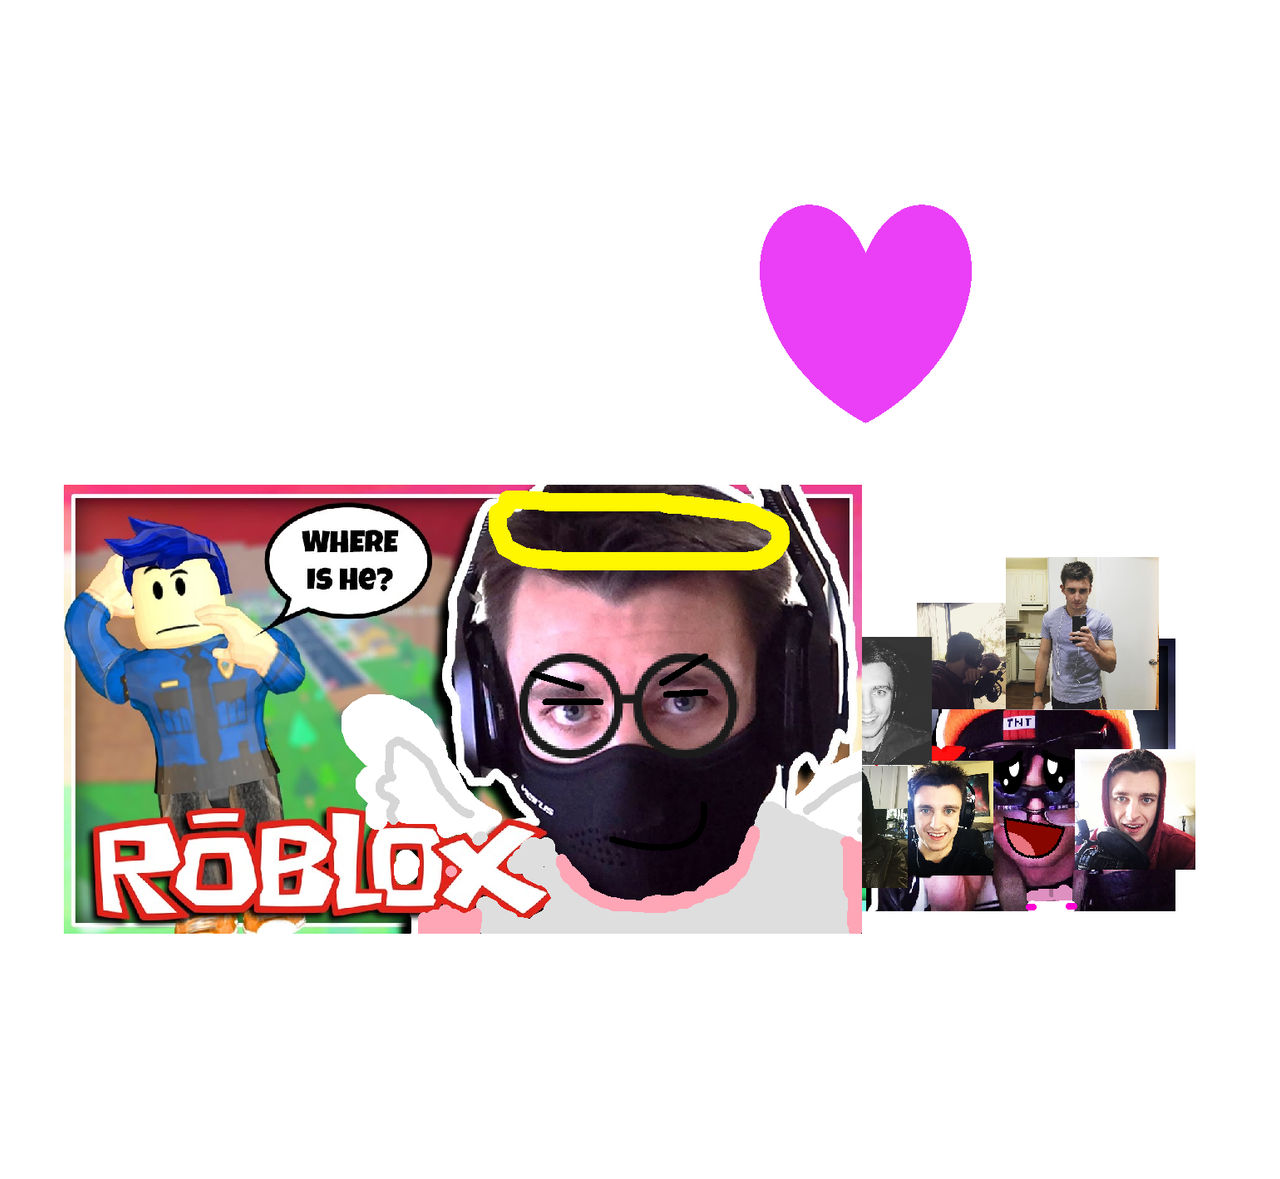 PACK 1] Roblox pose pack for twitch / Discord by DELDOVA on DeviantArt